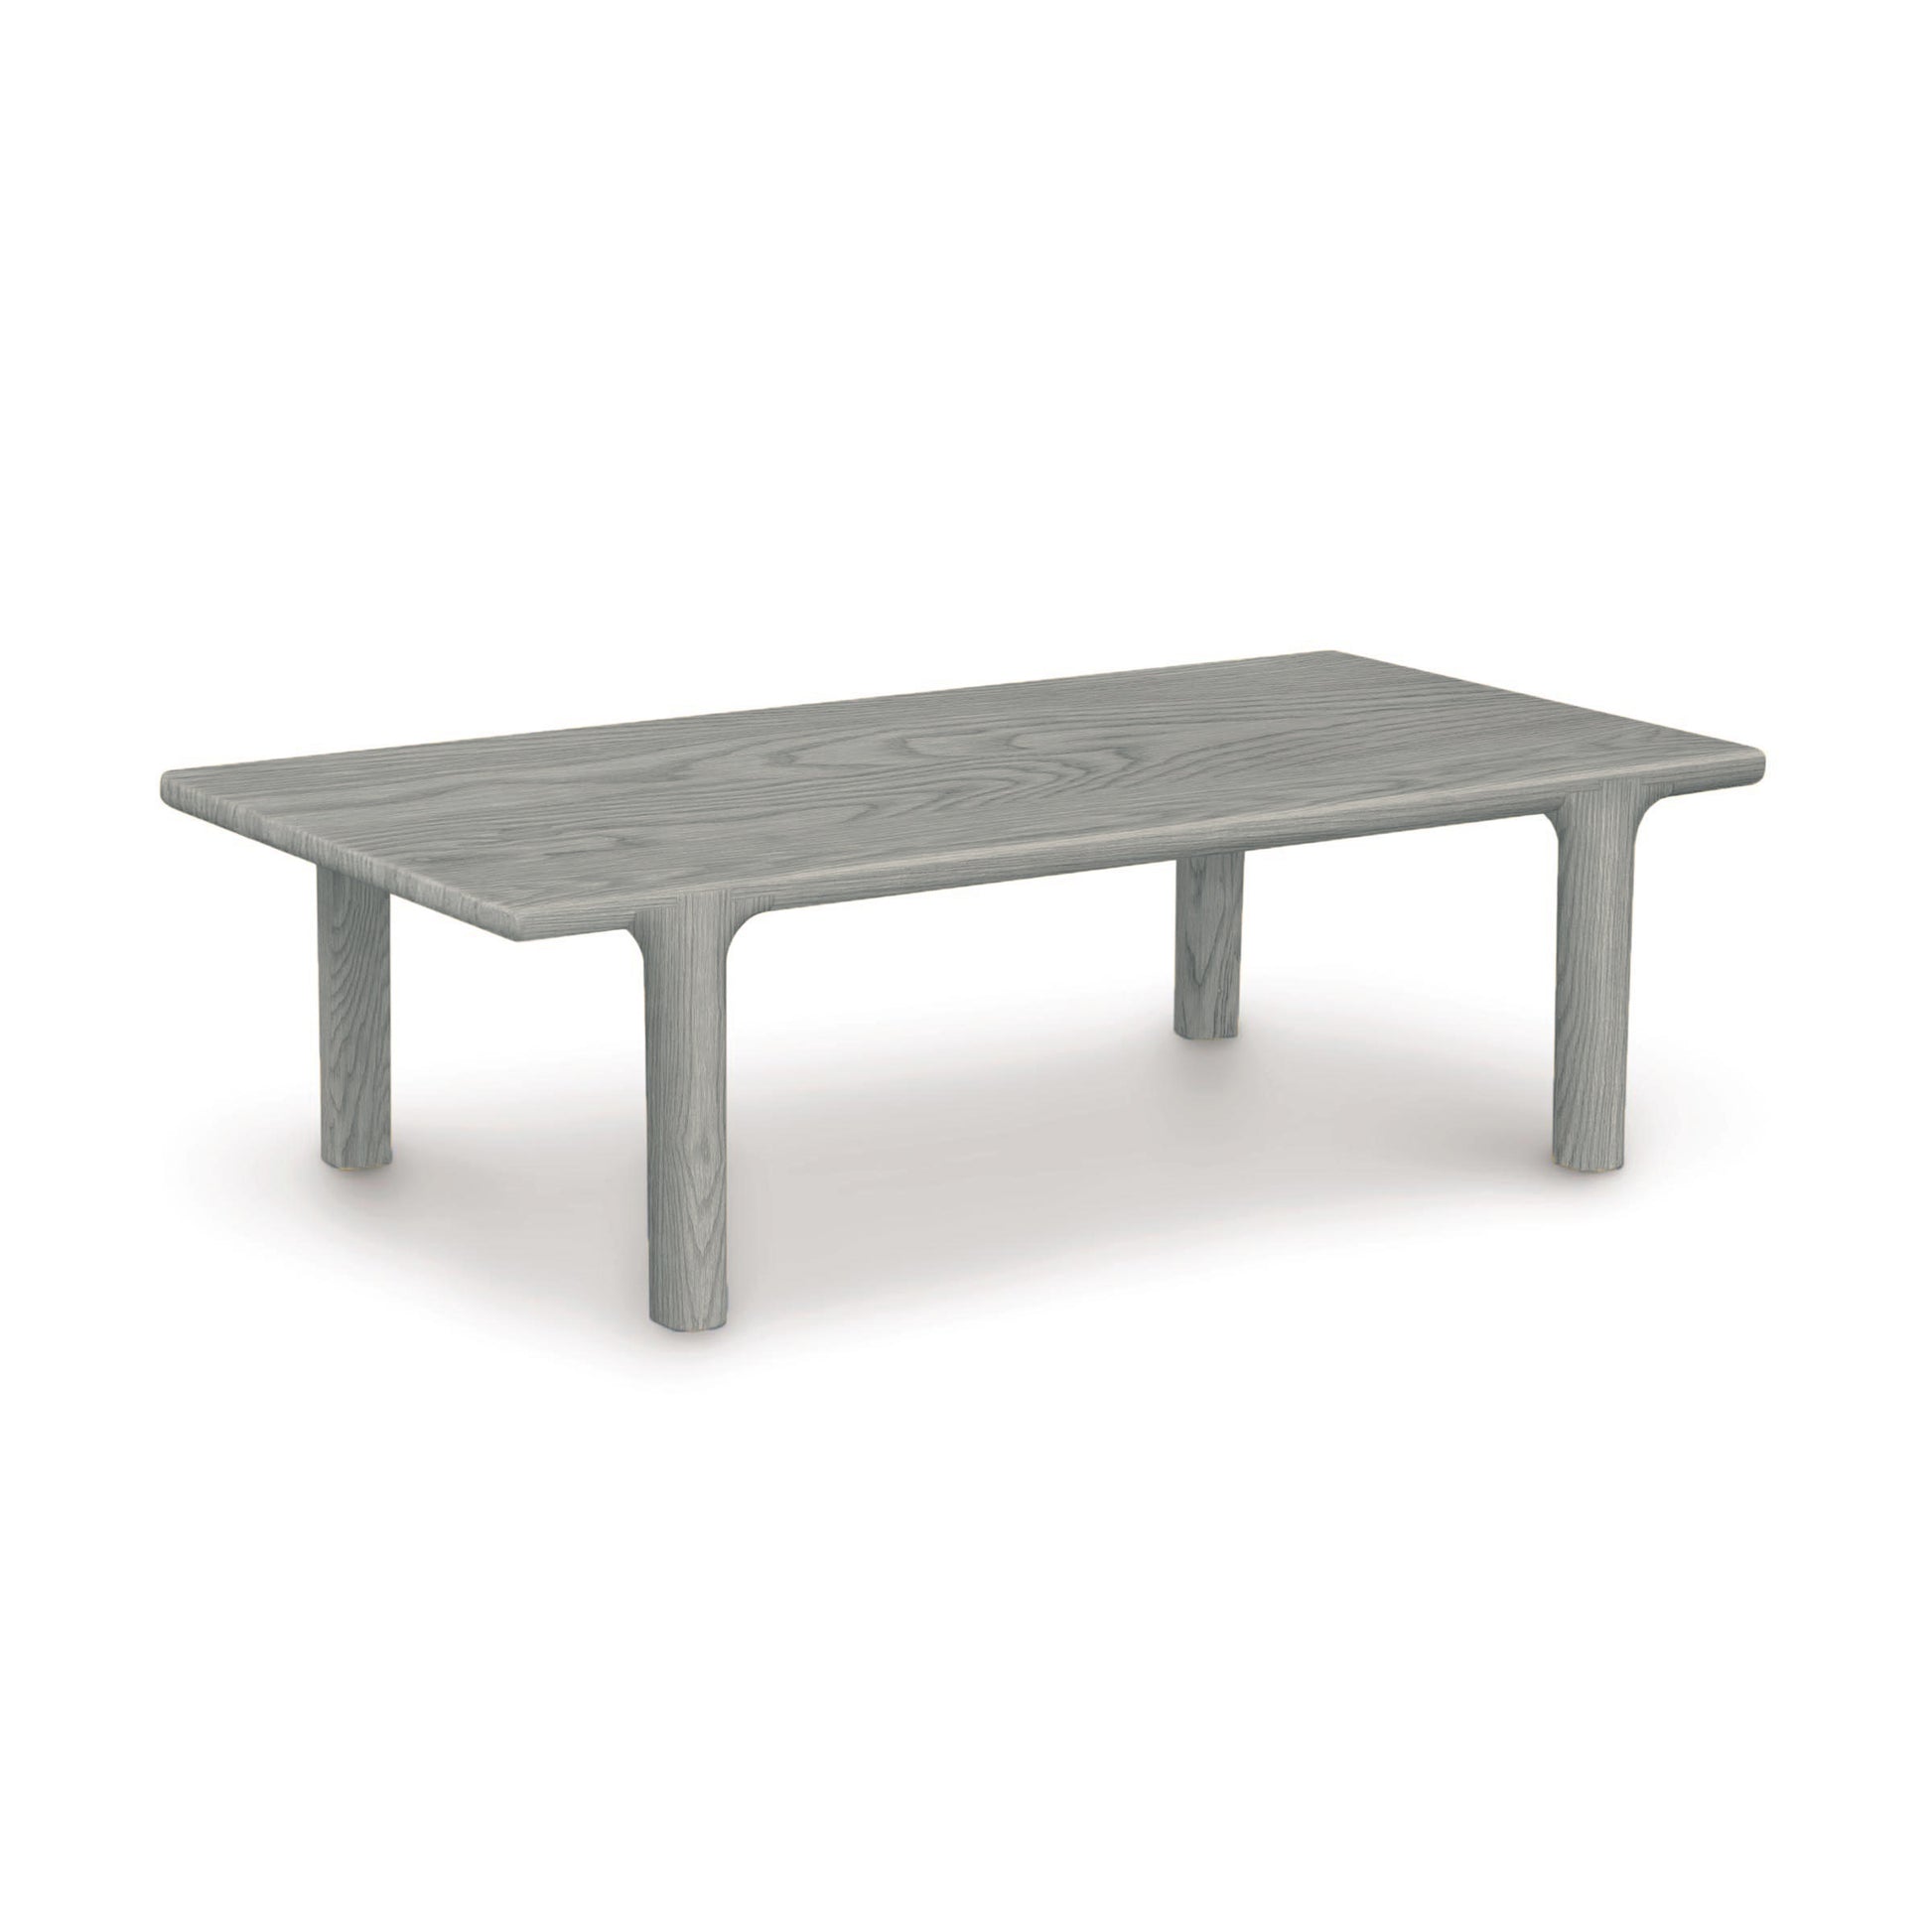 A contemporary Sierra Rectangular Coffee Table by Copeland Furniture on a white background.